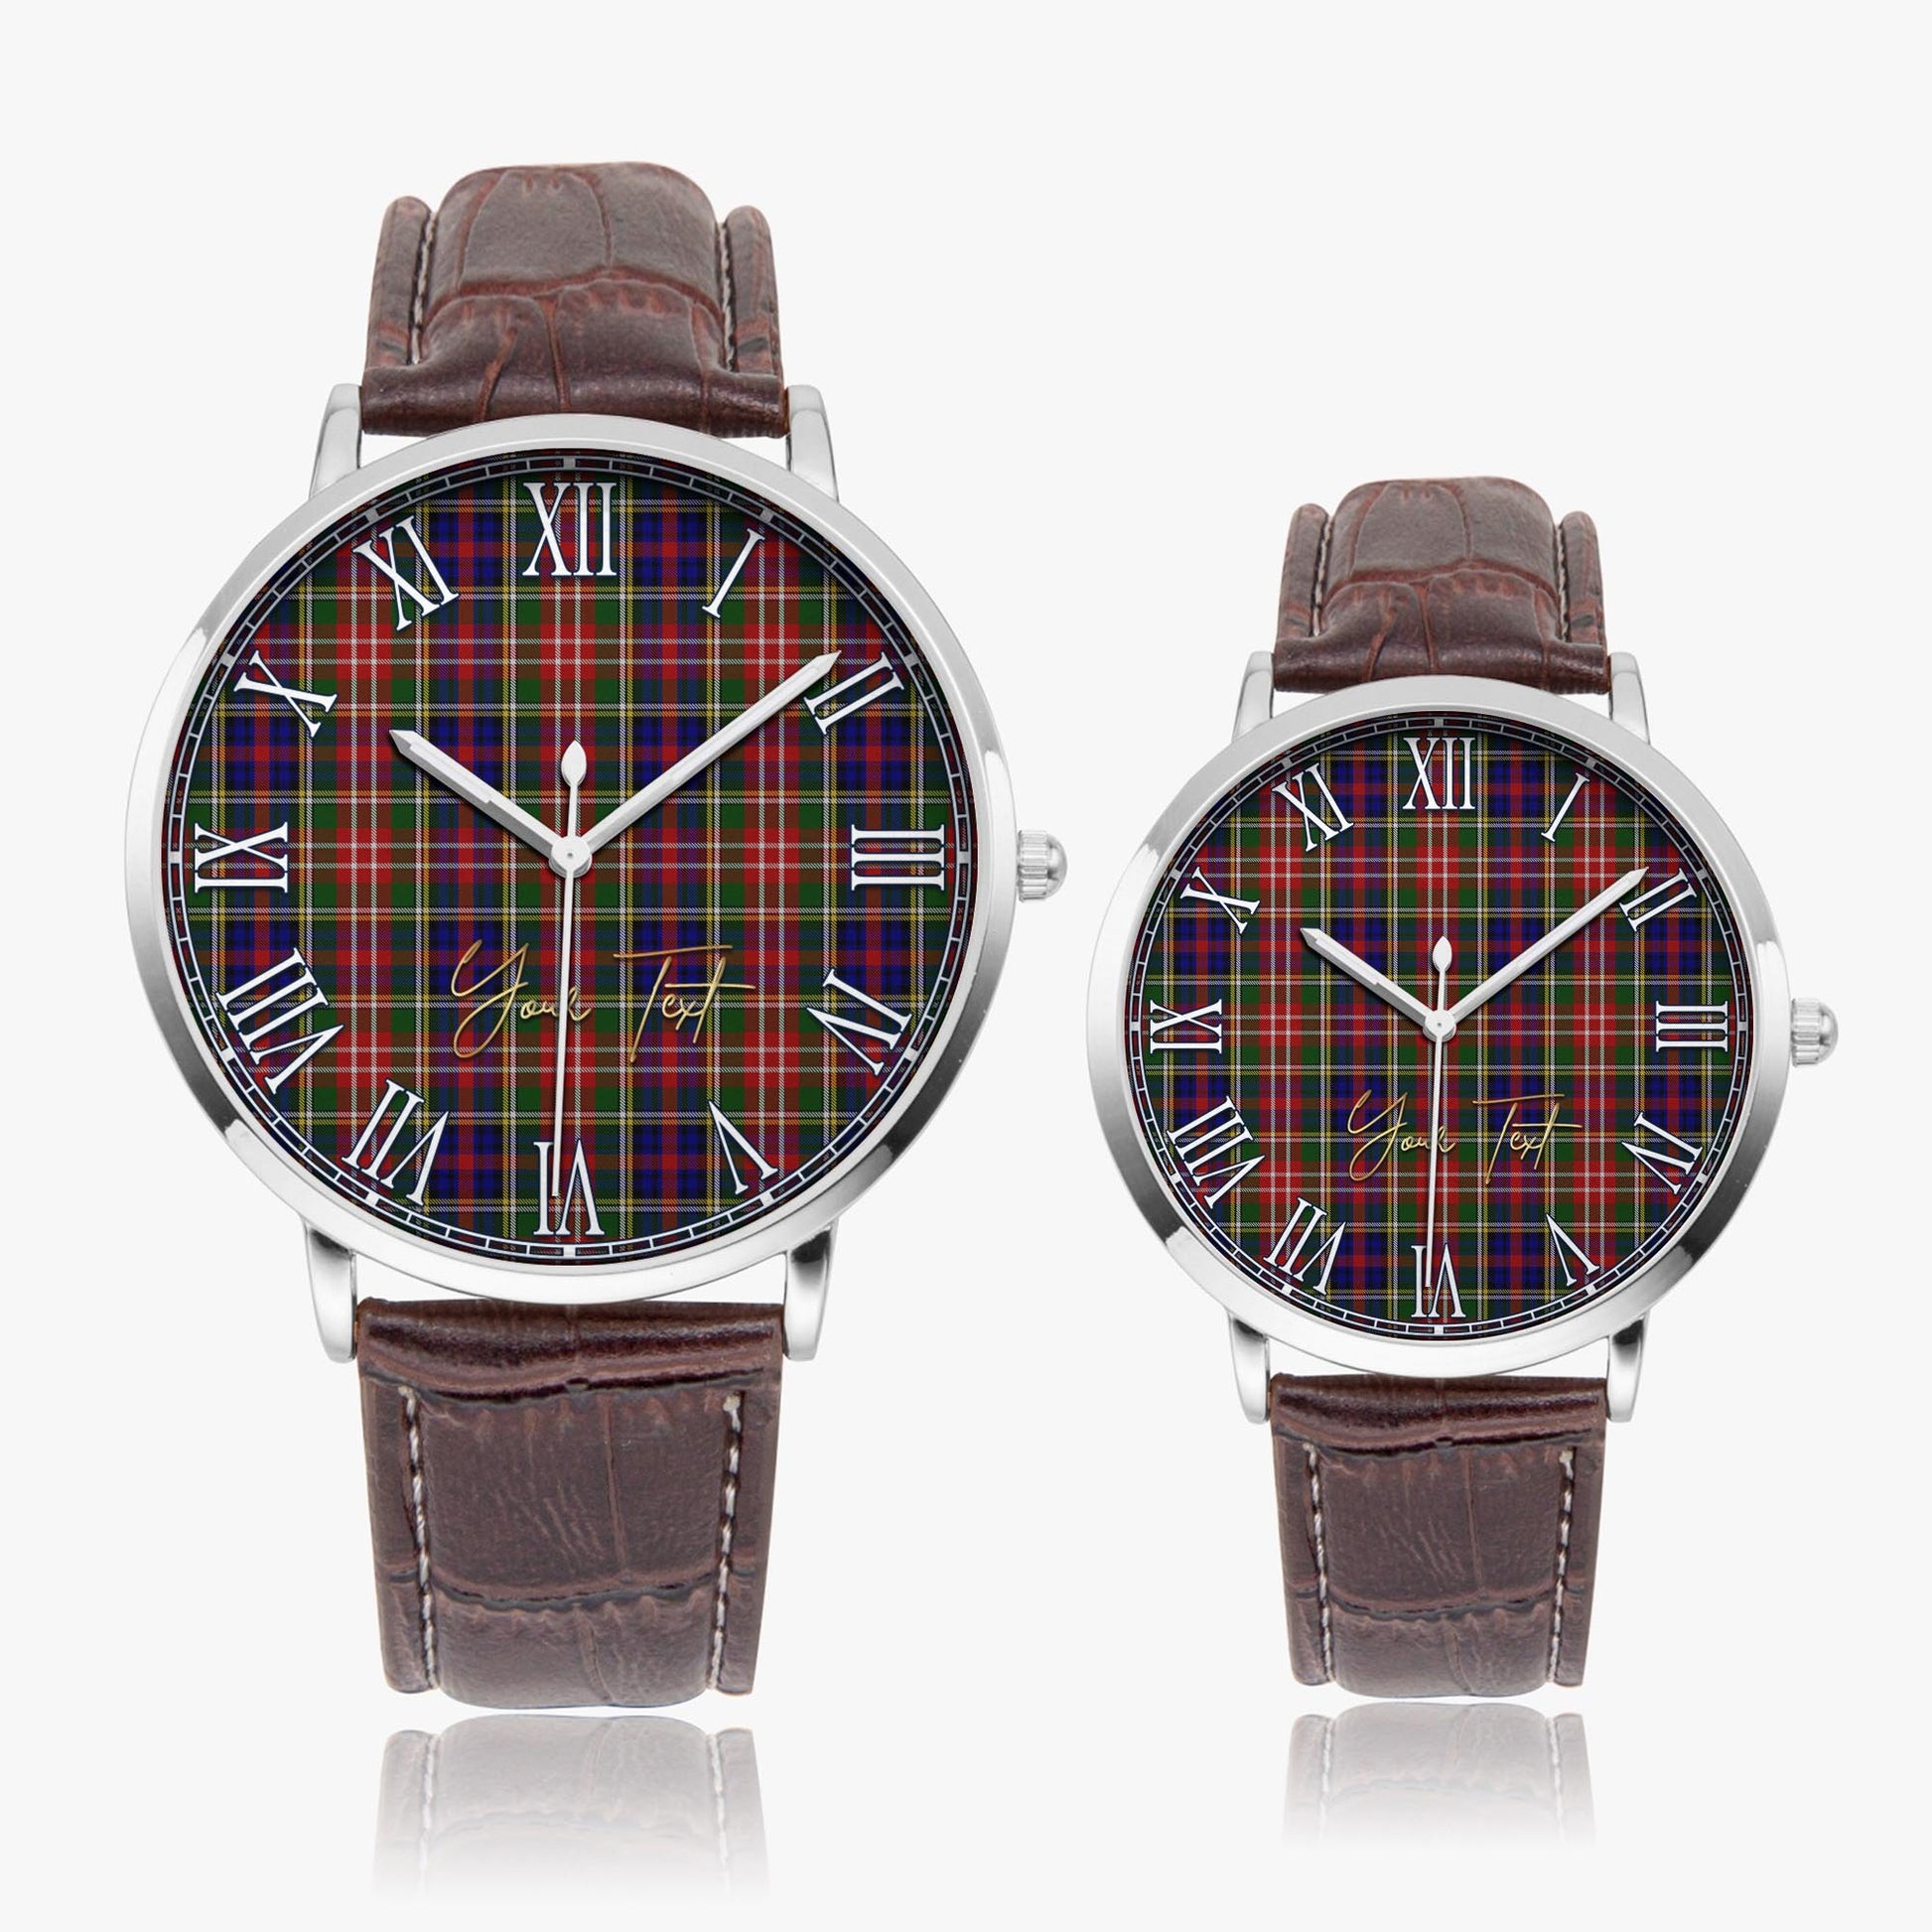 Christie Tartan Personalized Your Text Leather Trap Quartz Watch Ultra Thin Silver Case With Brown Leather Strap - Tartanvibesclothing